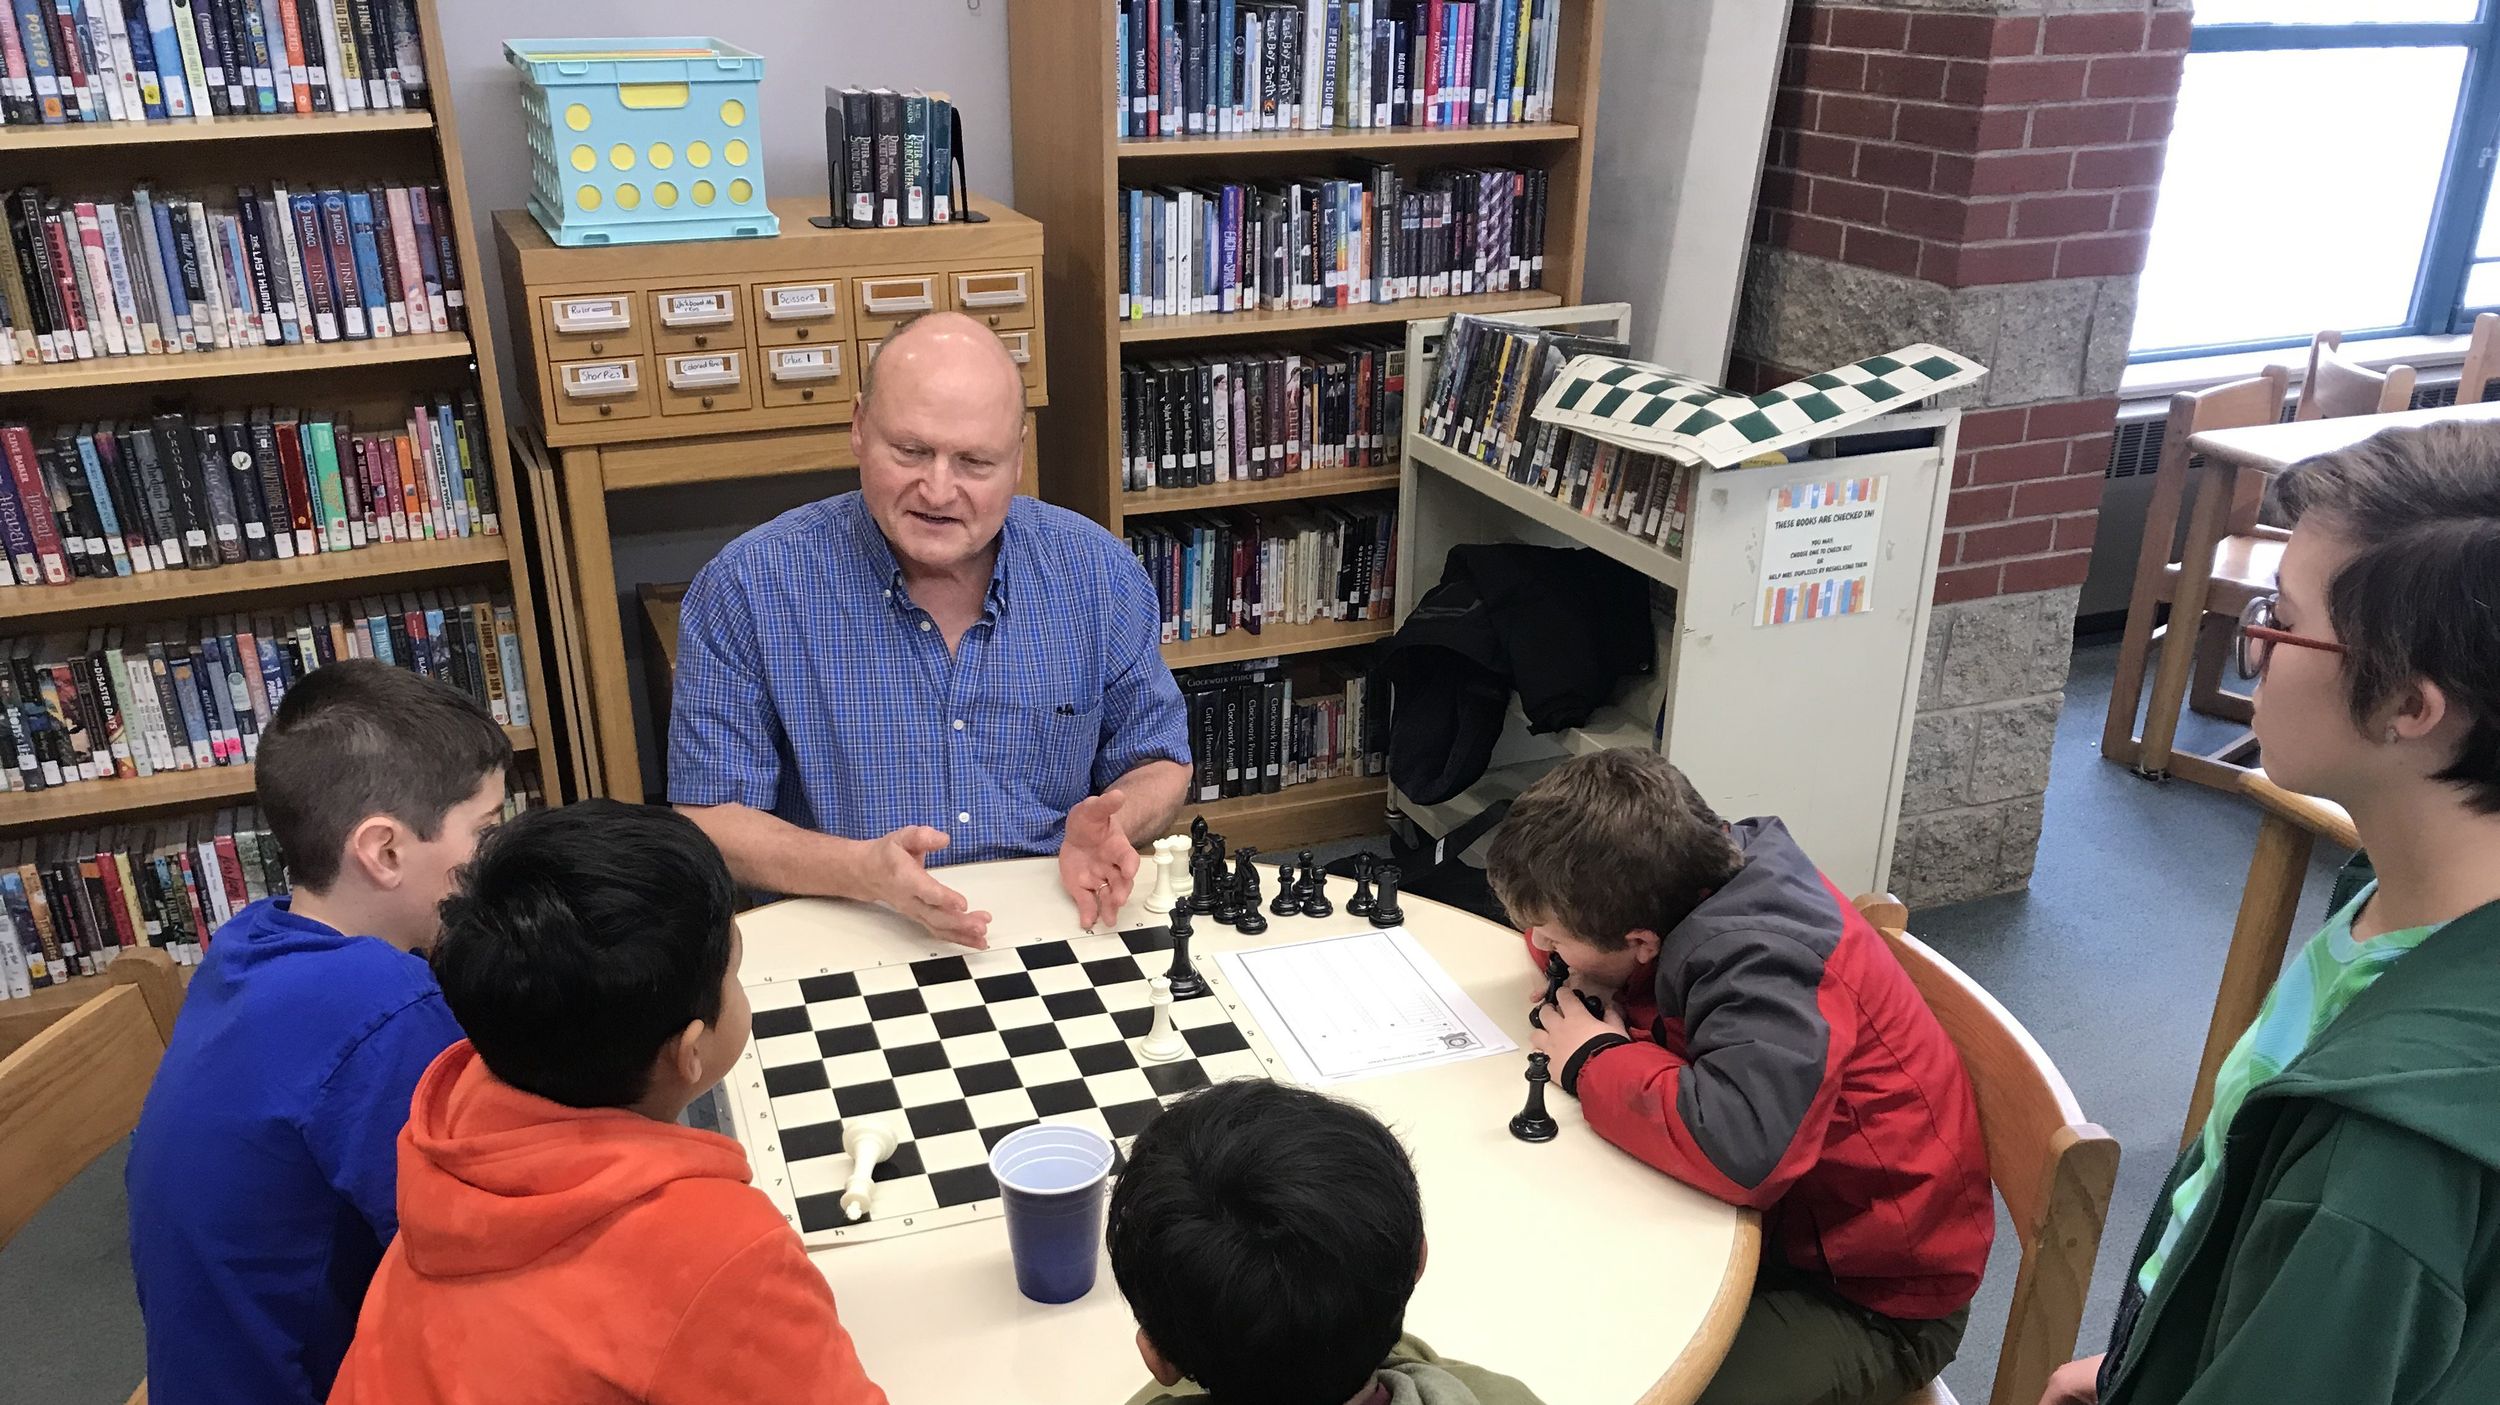 Real-life 'The Queen's Gambit': Custodian leads school chess teams